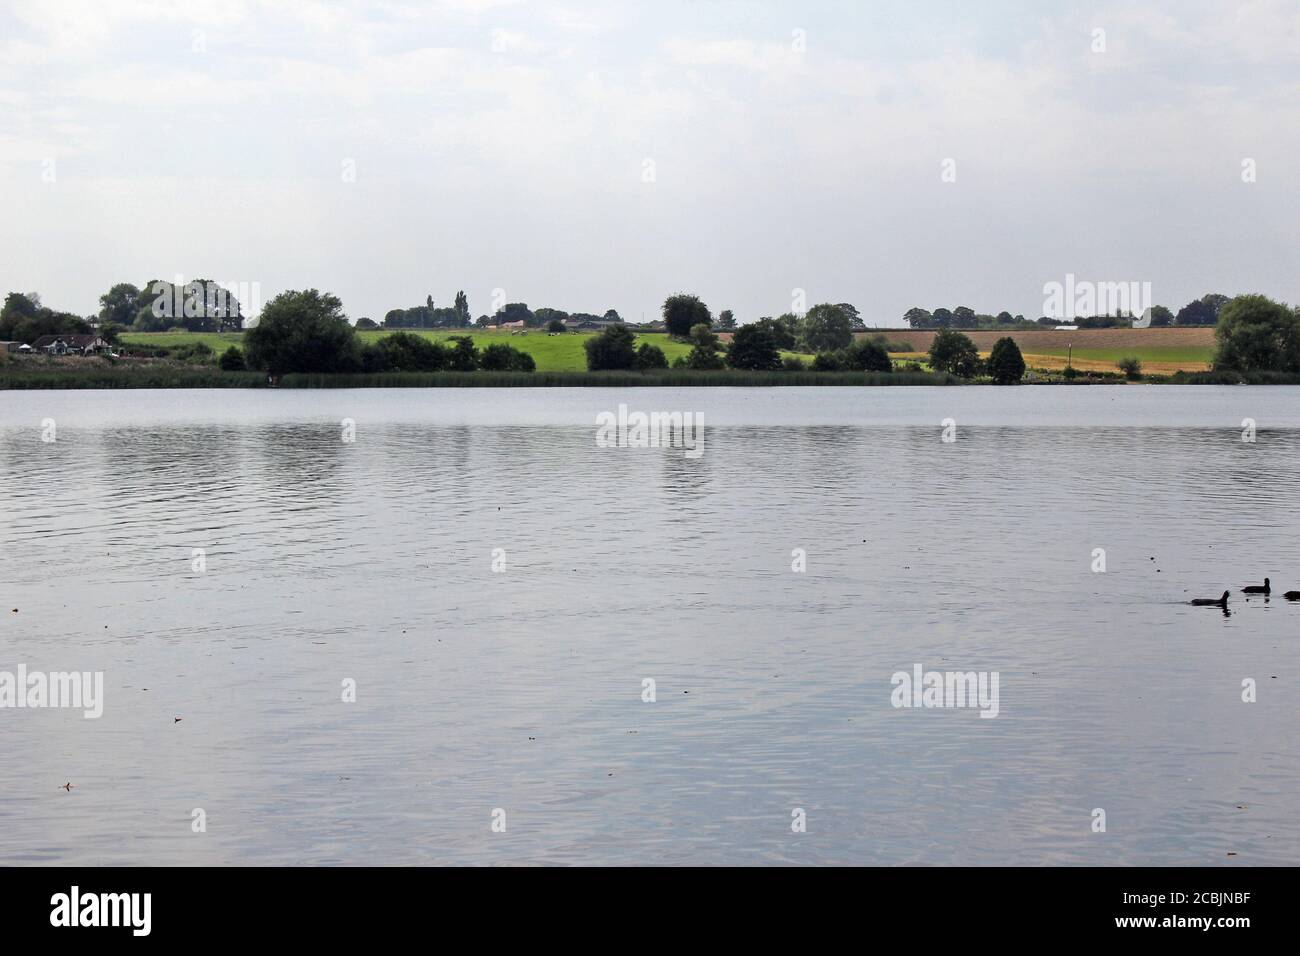 Beautiful scenery of Pickmere lake on a cloudy day in Cheshire, England Stock Photo